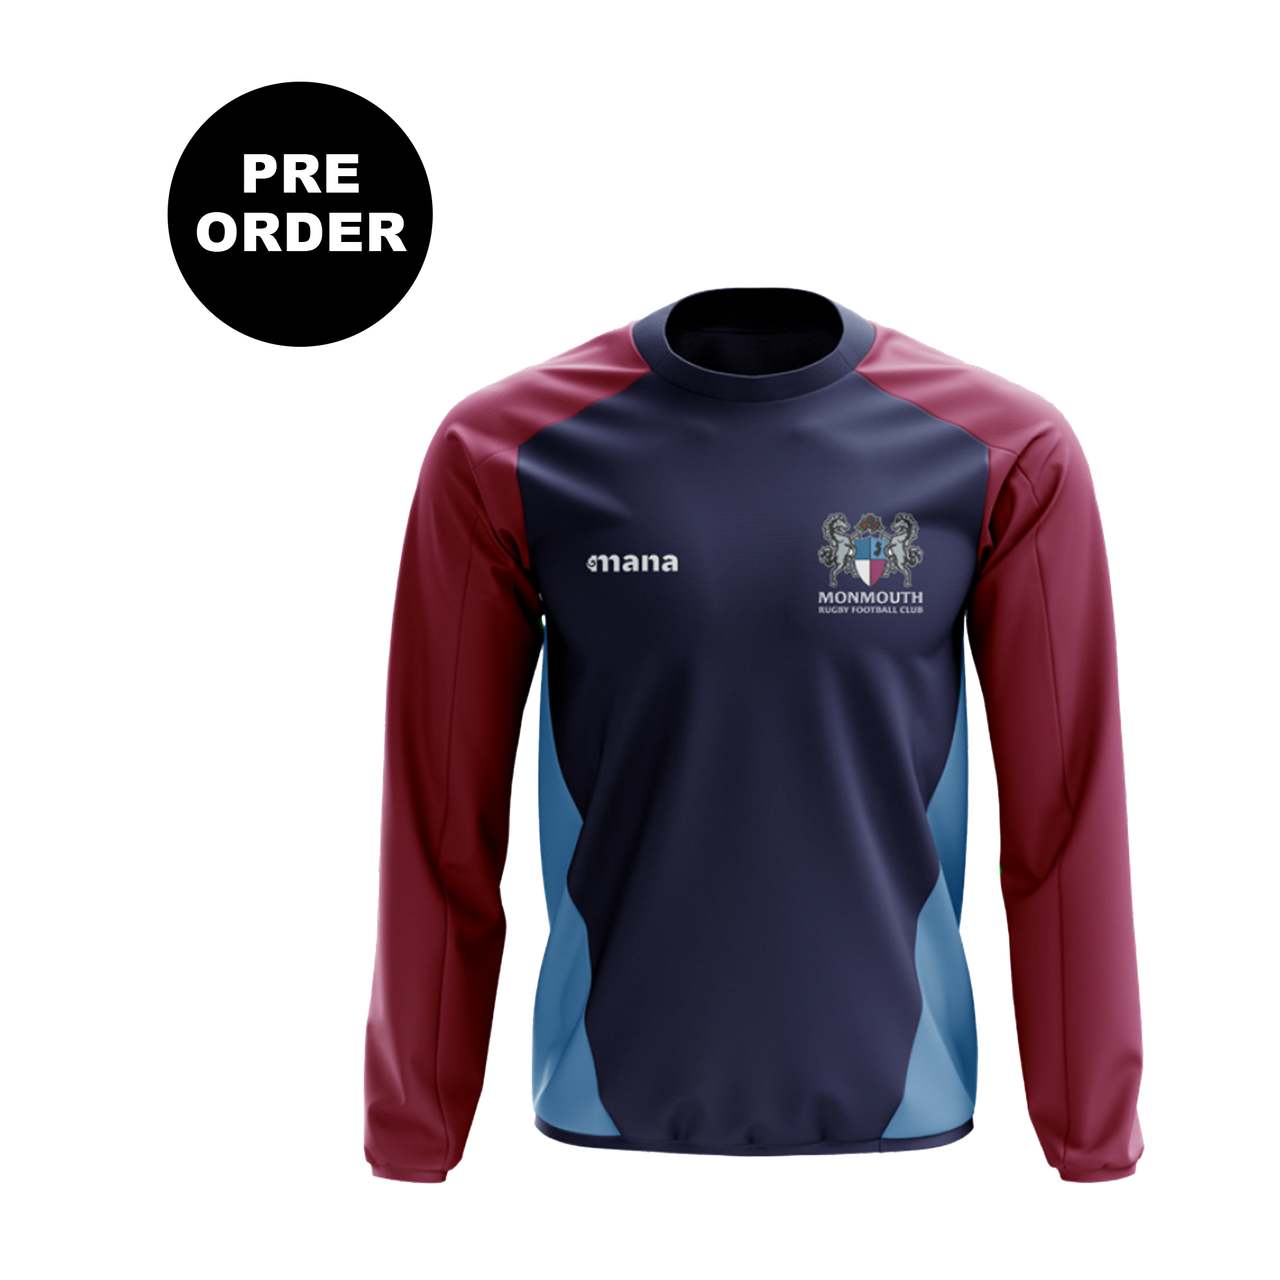 Monmouth Rugby Contact Jacket